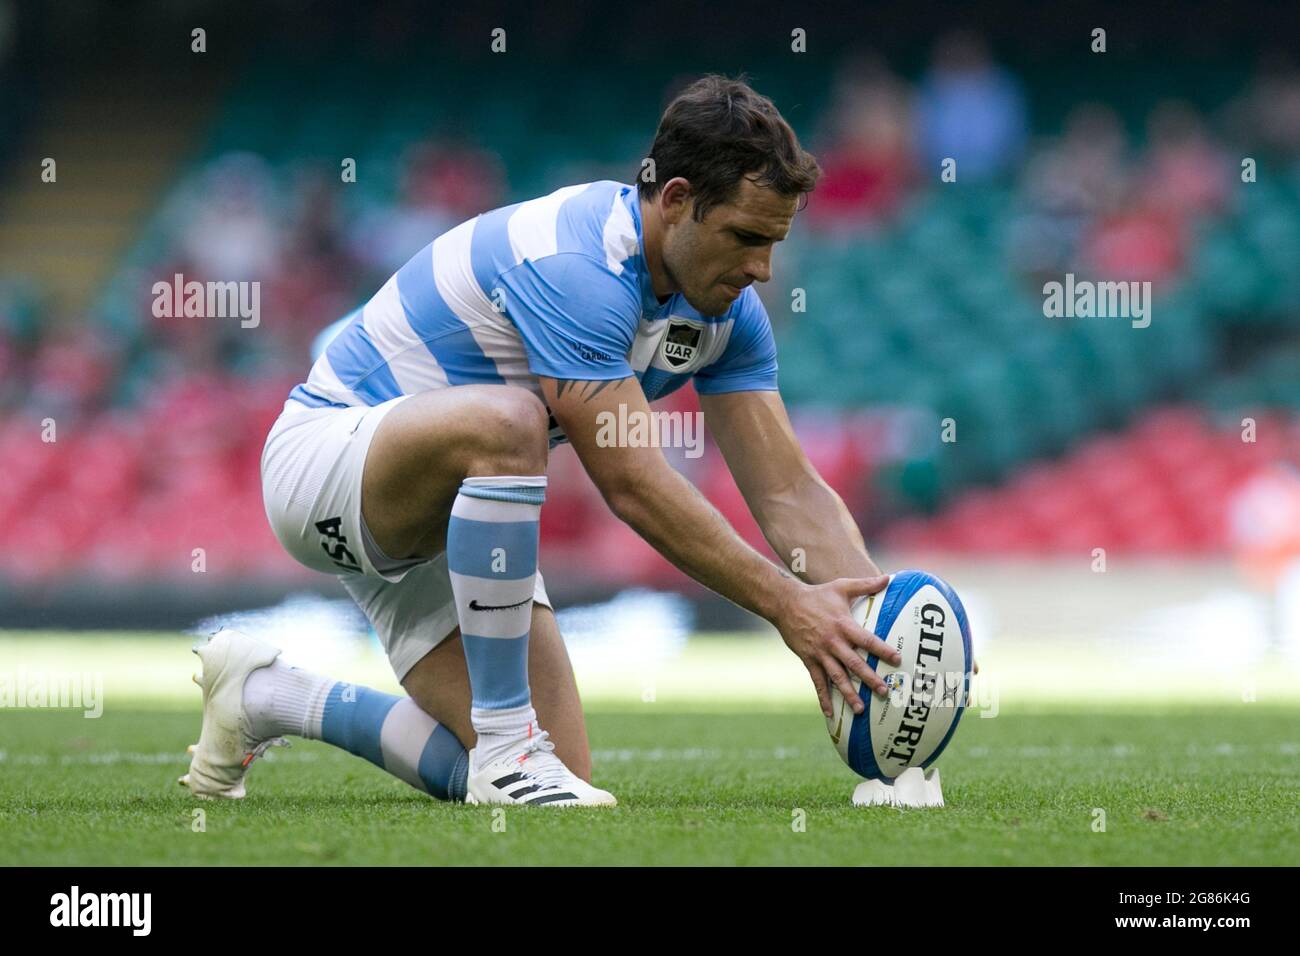 Cardiff, UK. 17th July, 2021. Cardiff, UK. July 17th : Nicolas Sanchez (Argentina) controls the ball during the 2021 Summer Internationals match between Wales and Argentina at Principality Stadium. Credit: Federico Guerra Morán/Alamy Live News Stock Photo